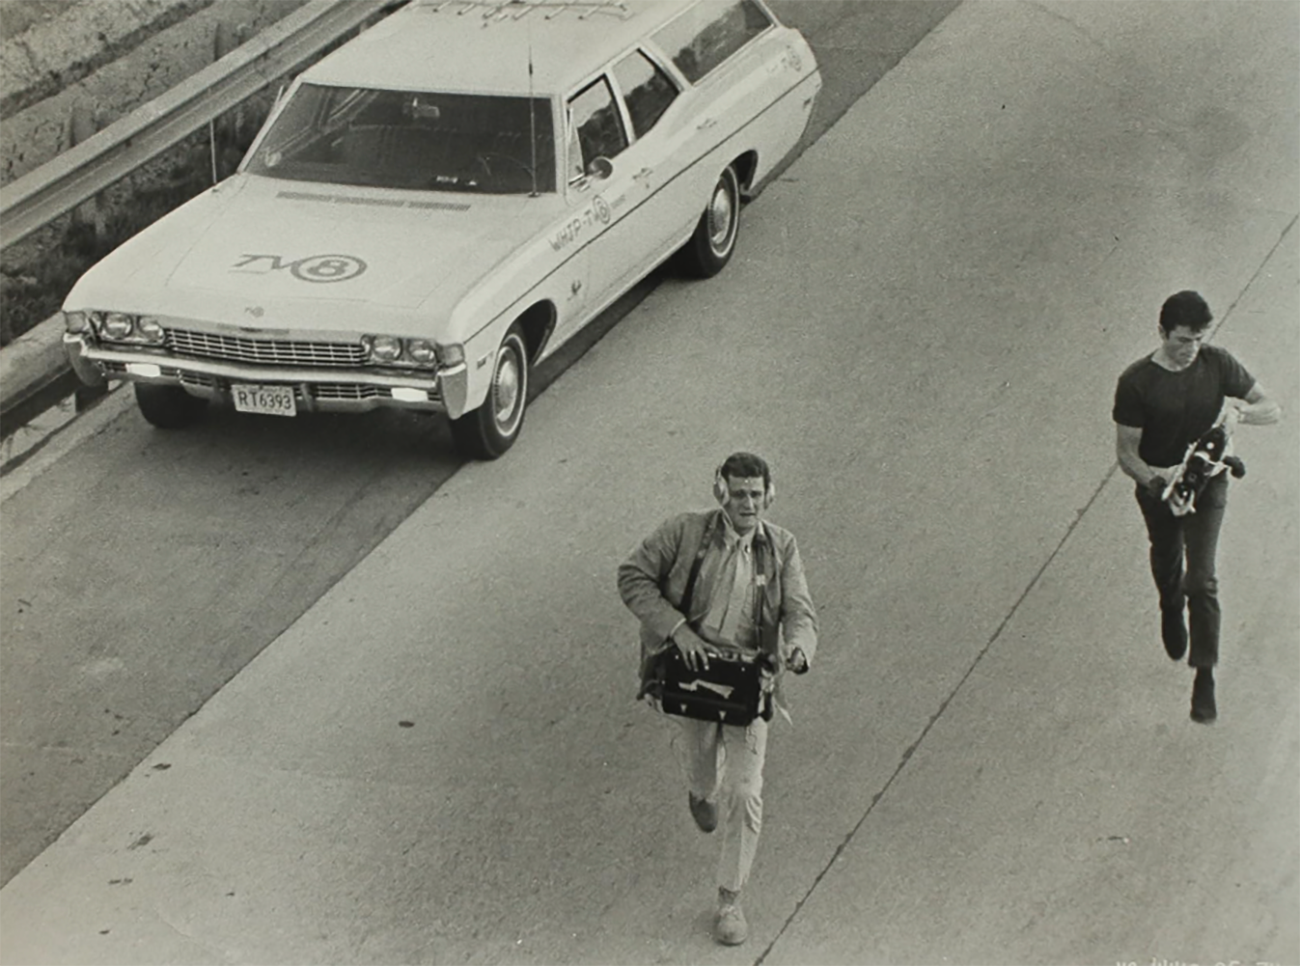 Peter Bonerz and Robert Forster carrying camera equipment in a film still from the 1960s.